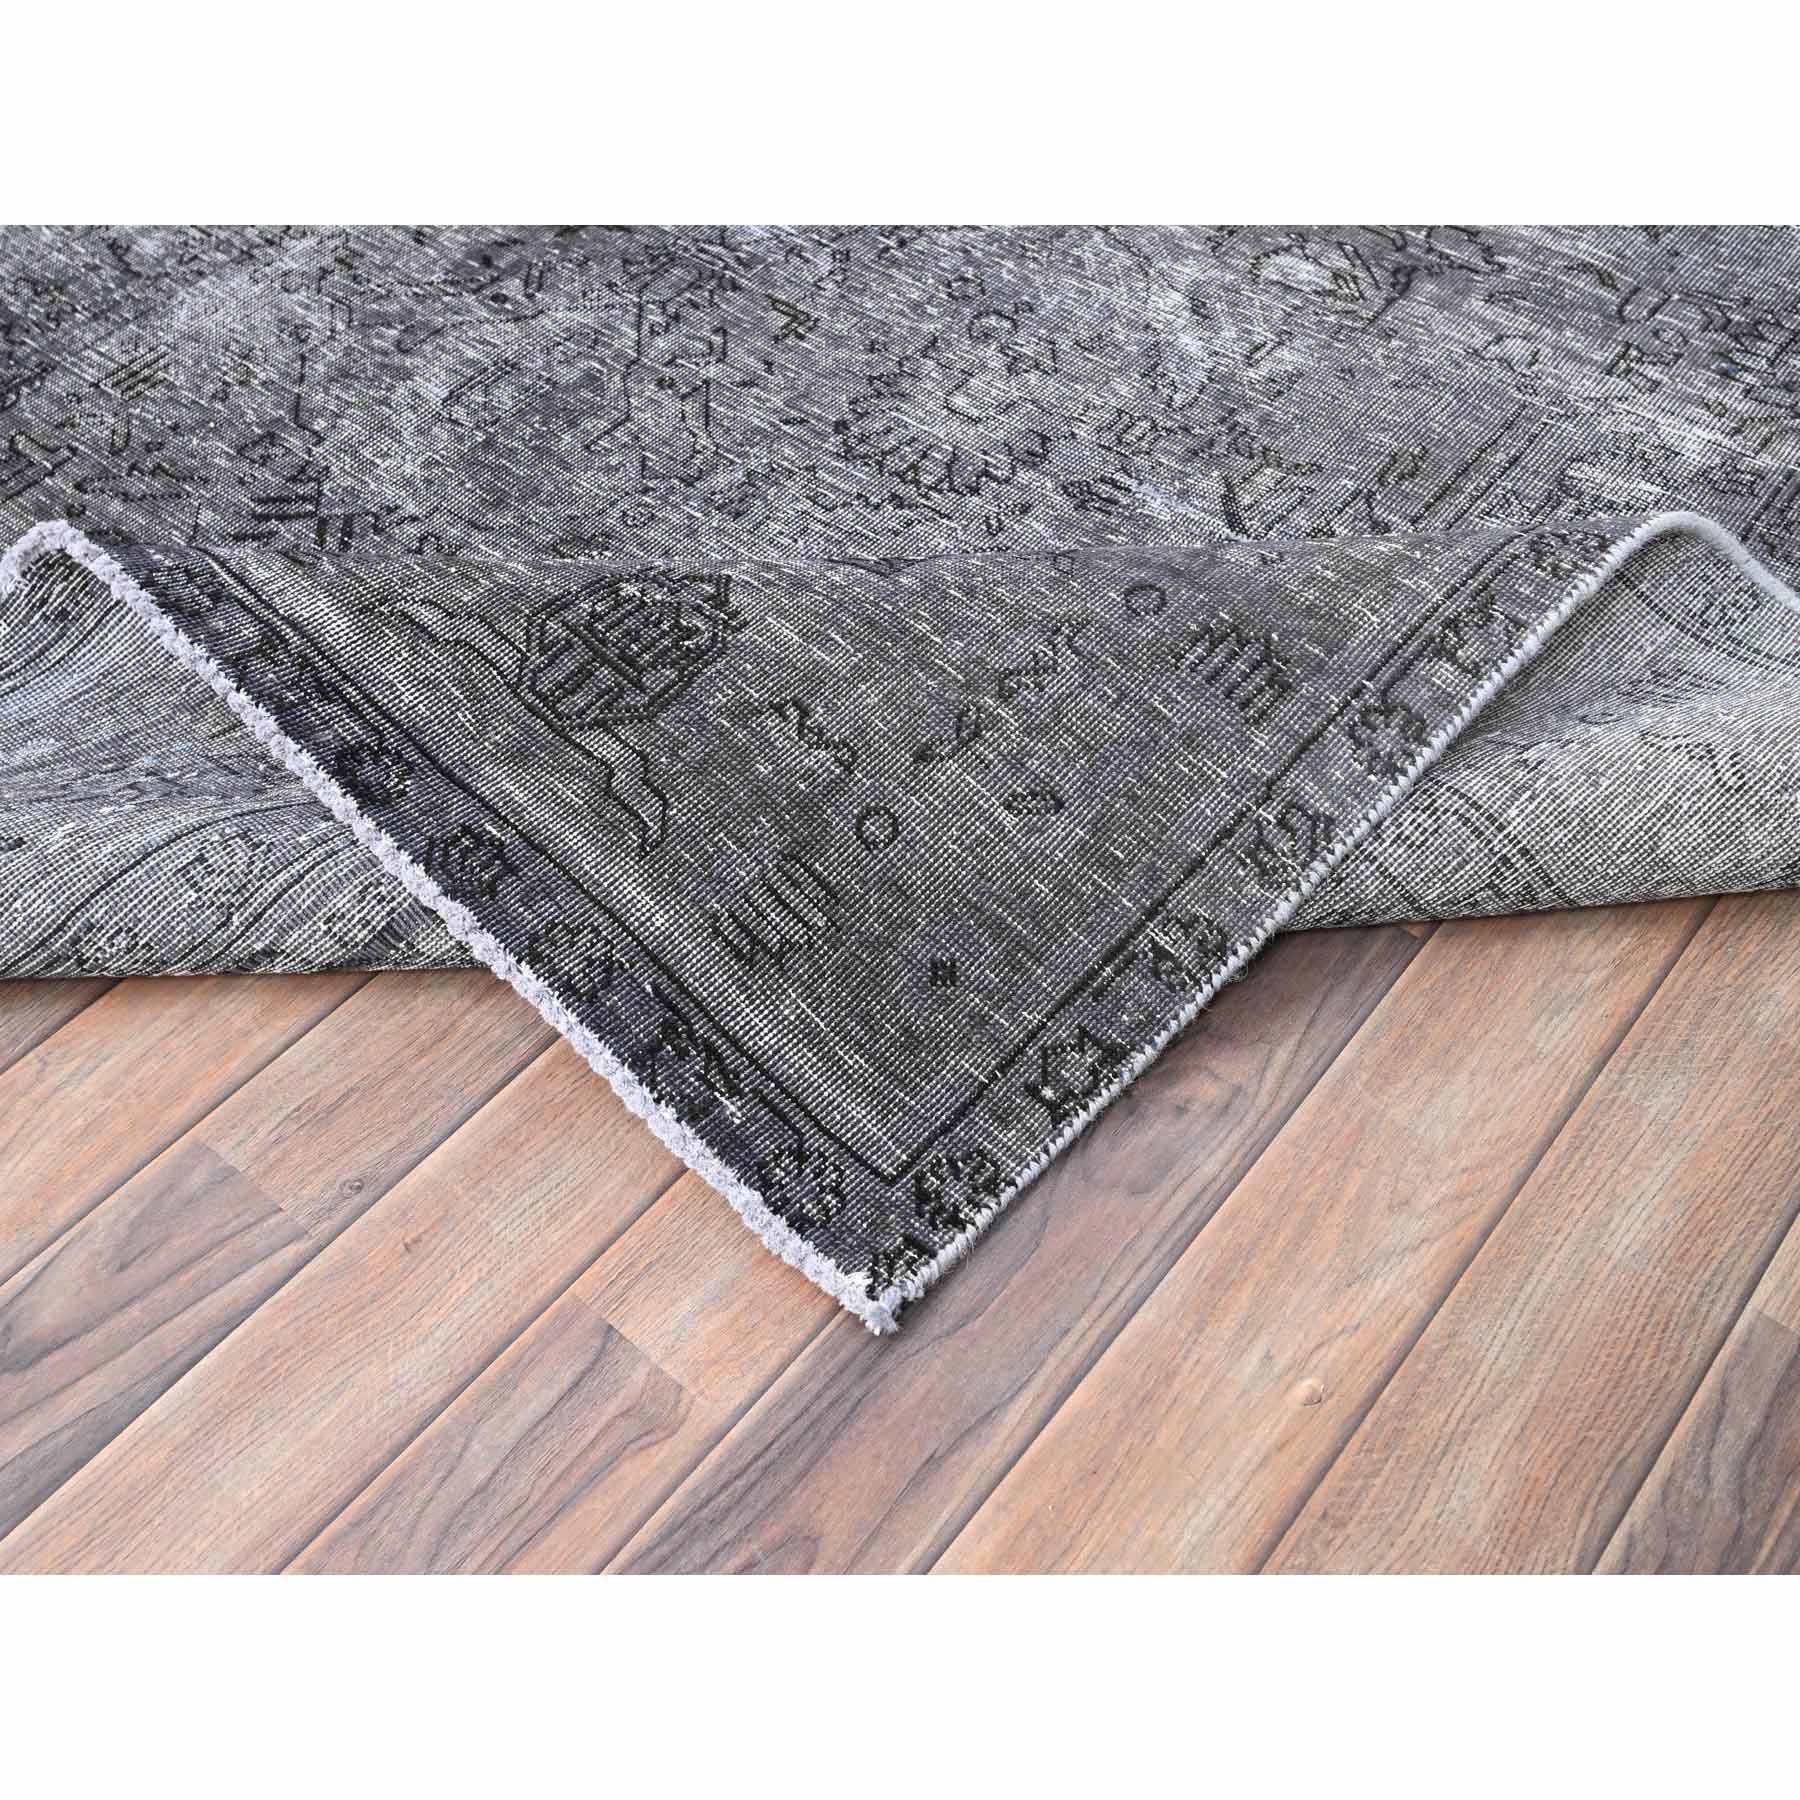 Overdyed-Vintage-Hand-Knotted-Rug-426995